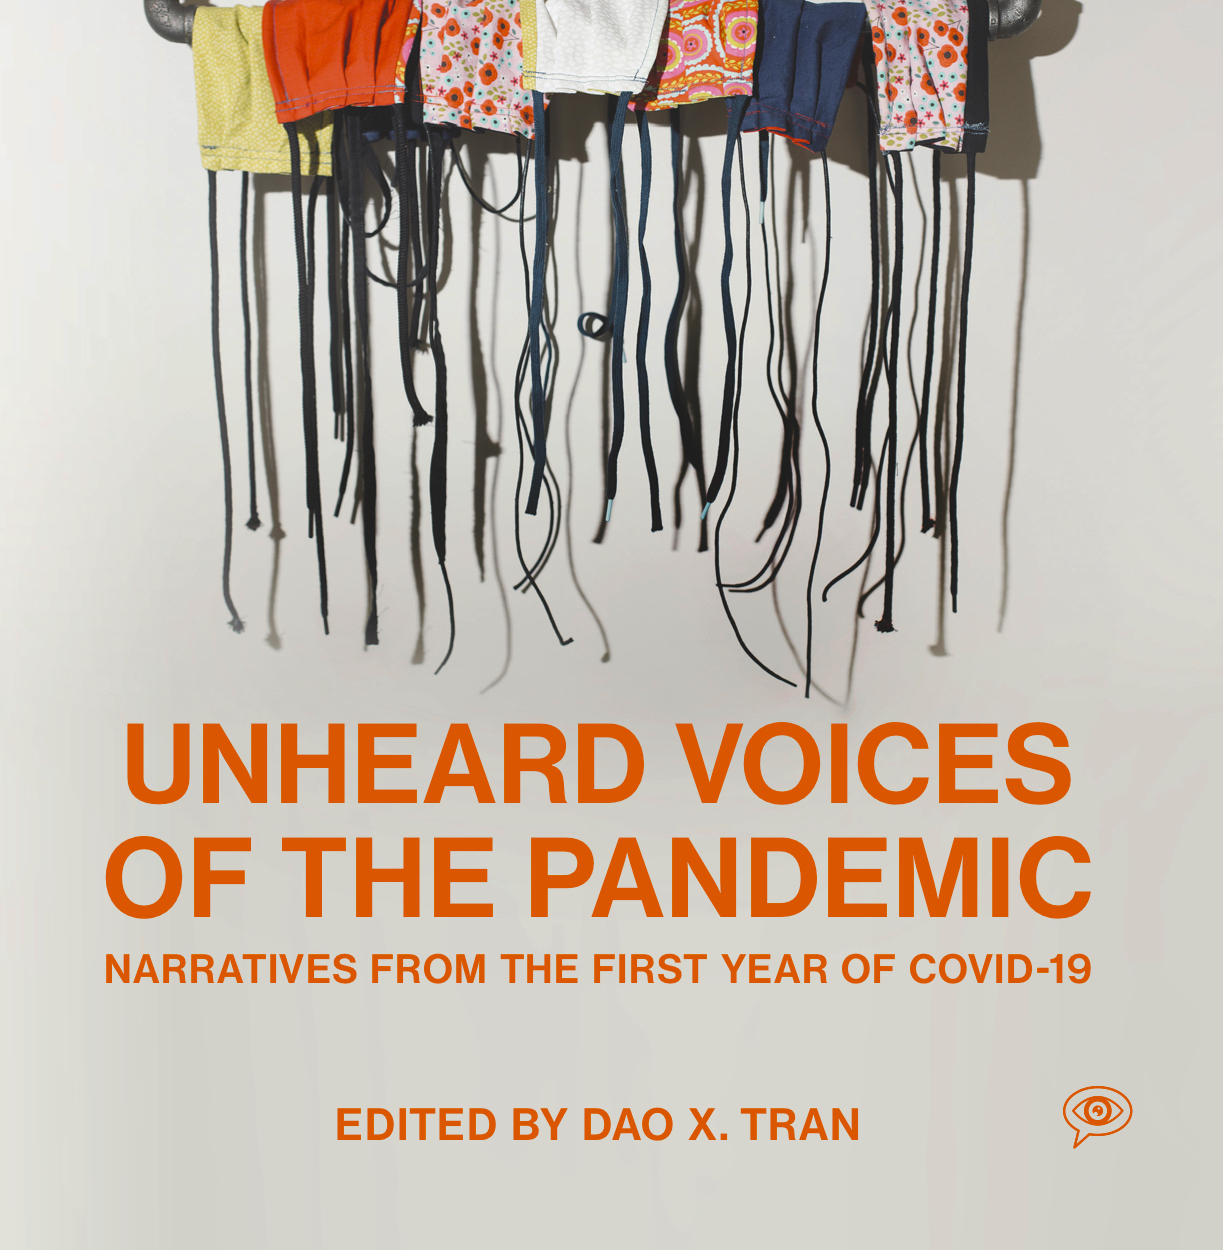 Book Club Discussion Questions: Unheard Voices of the Pandemic